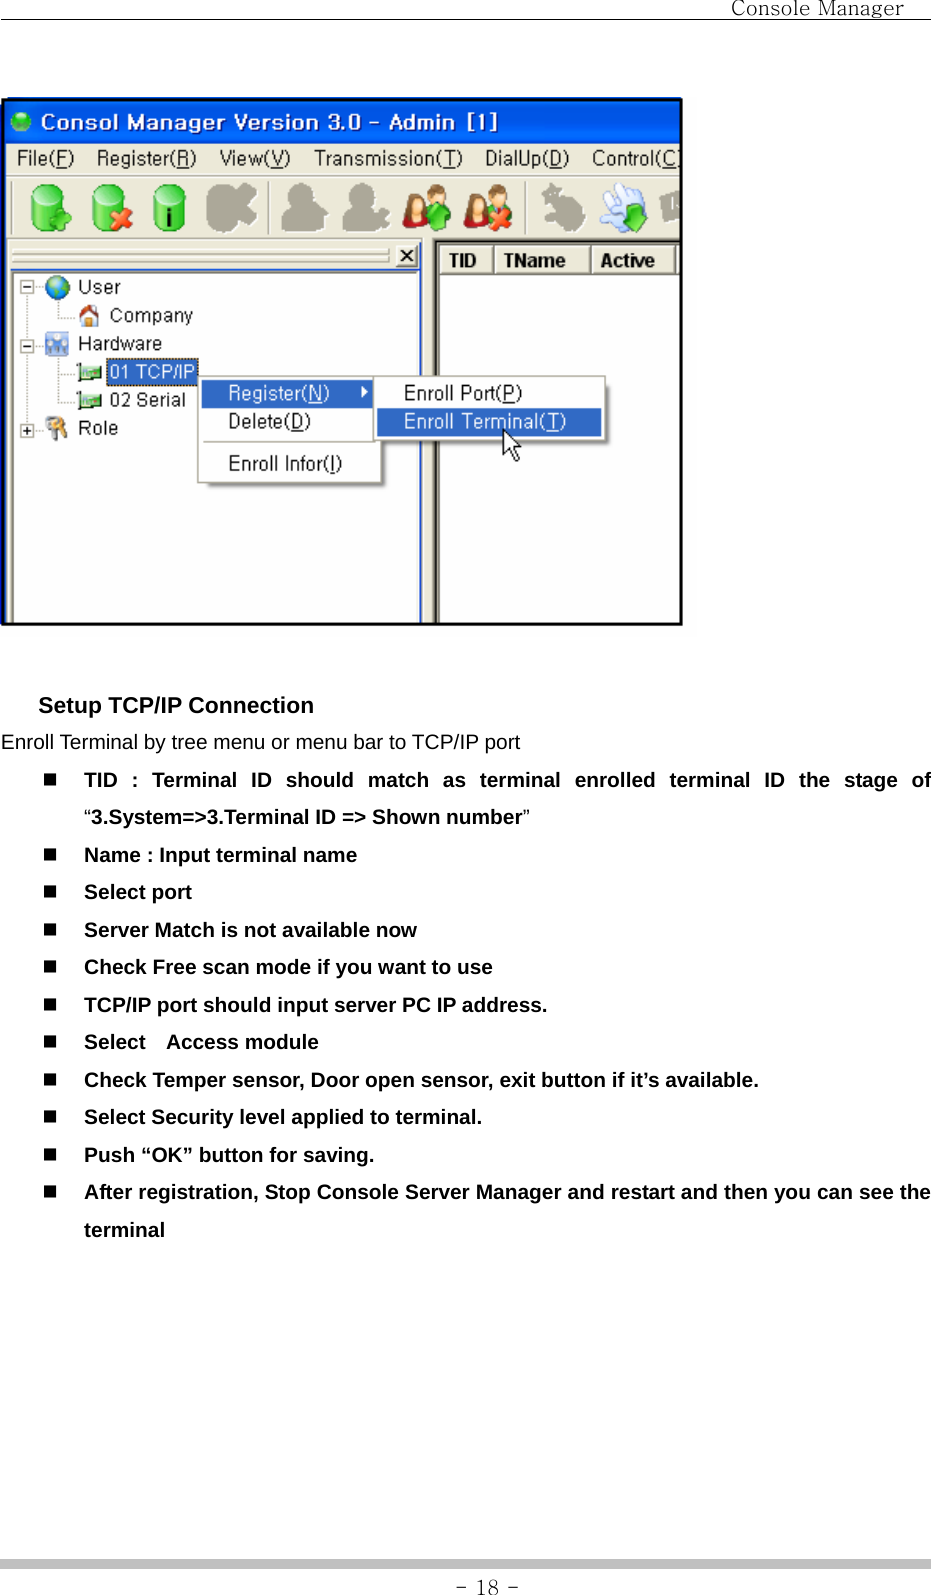                                Console Manager               - 18 -   Setup TCP/IP Connection Enroll Terminal by tree menu or menu bar to TCP/IP port    TID : Terminal ID should match as terminal enrolled terminal ID the stage of “3.System=&gt;3.Terminal ID =&gt; Shown number”  Name : Input terminal name  Select port    Server Match is not available now  Check Free scan mode if you want to use  TCP/IP port should input server PC IP address.  Select  Access module  Check Temper sensor, Door open sensor, exit button if it’s available.  Select Security level applied to terminal.  Push “OK” button for saving.  After registration, Stop Console Server Manager and restart and then you can see the terminal  